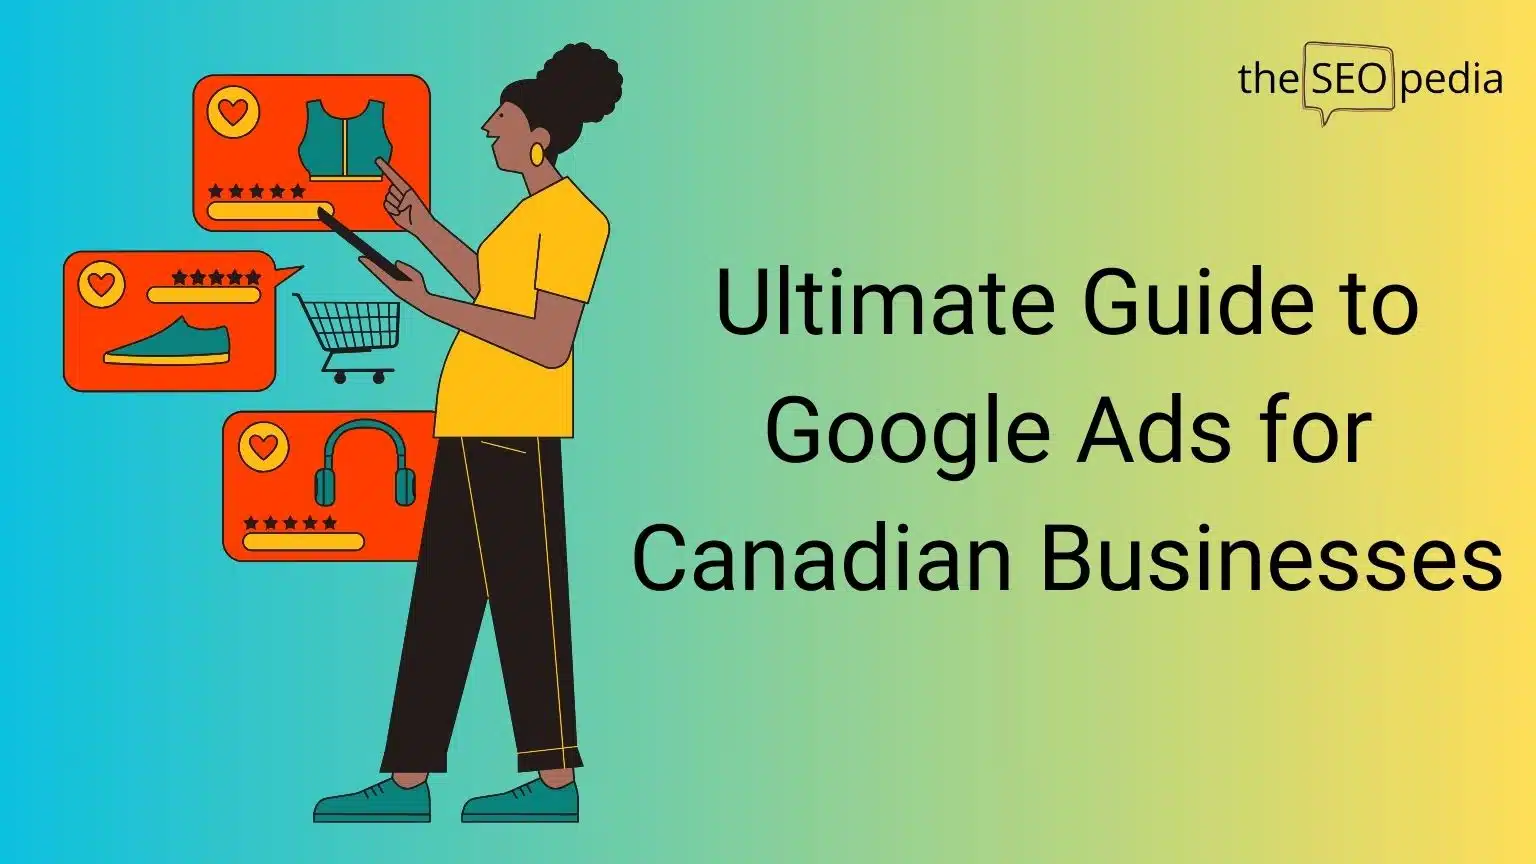 Google Ads for Canadian Businesses